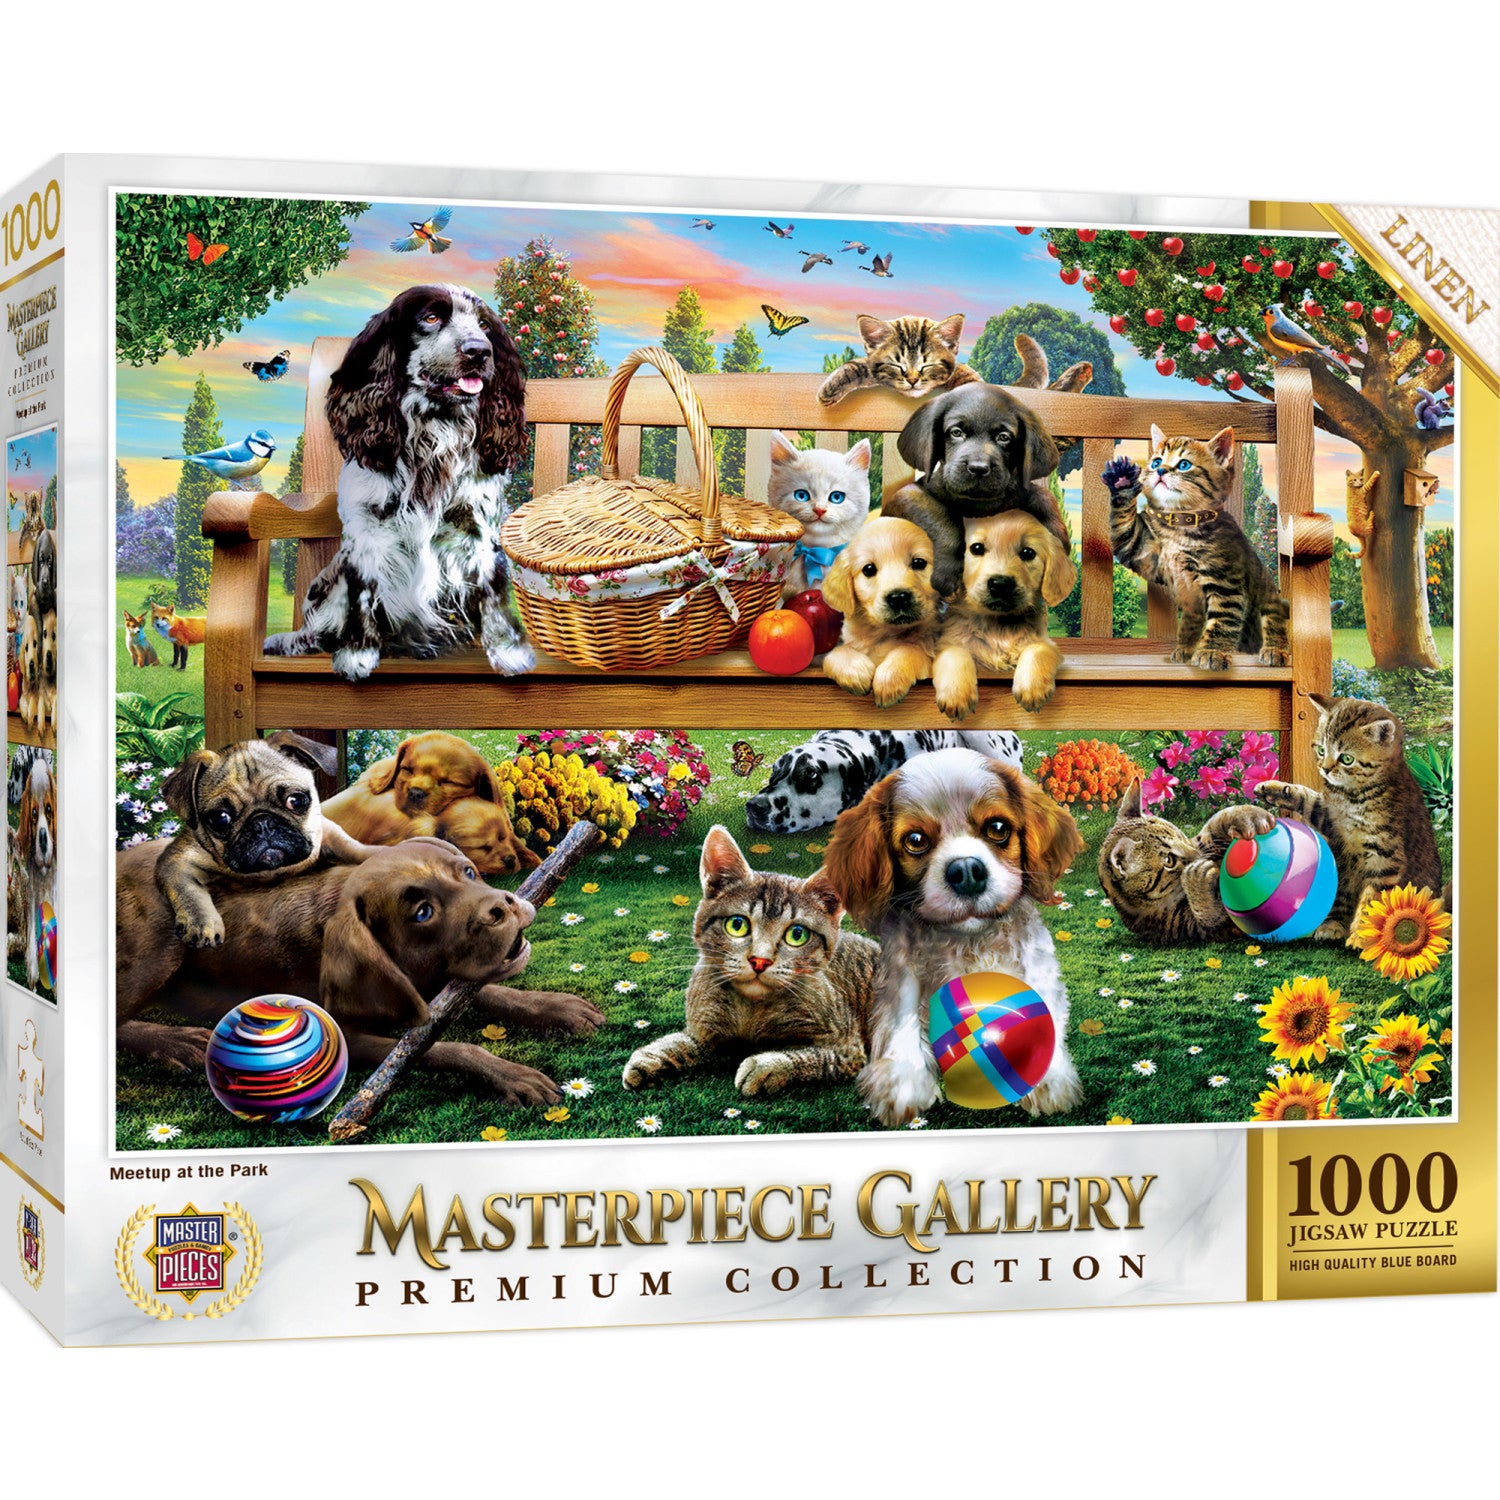 Masterpiece Gallery - Meetup at the Park 1000 Piece Puzzle